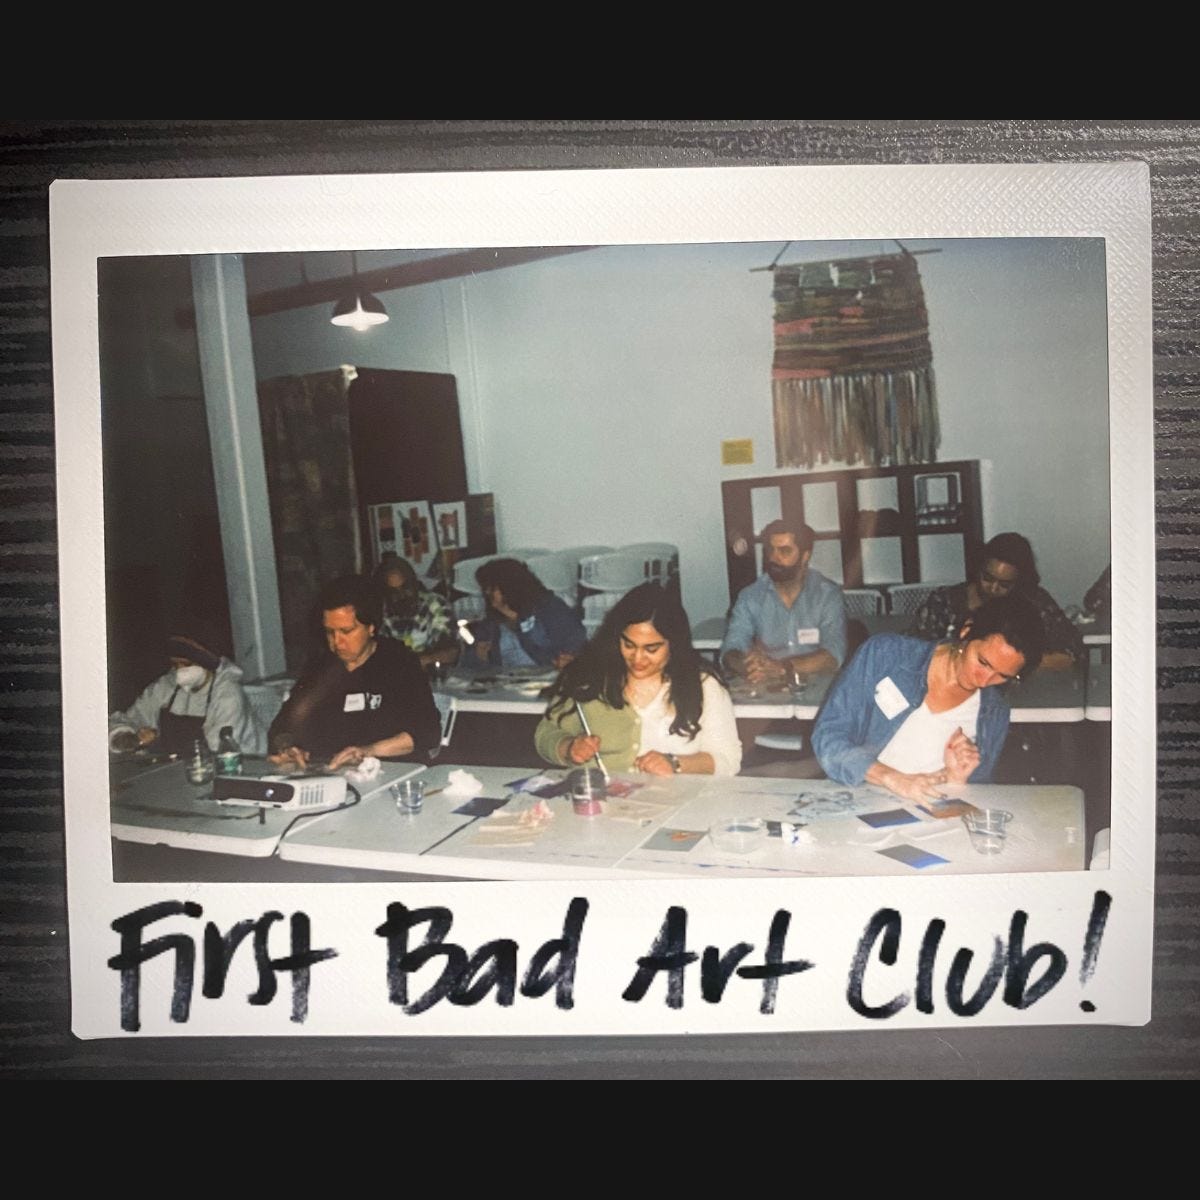 A polaroid photo of BAC with "First Bad Art Club!" written at the bottom. The photo is of 4 women working on art on the front row, and 2 men and 2 women working on art in the second row of the classroom.